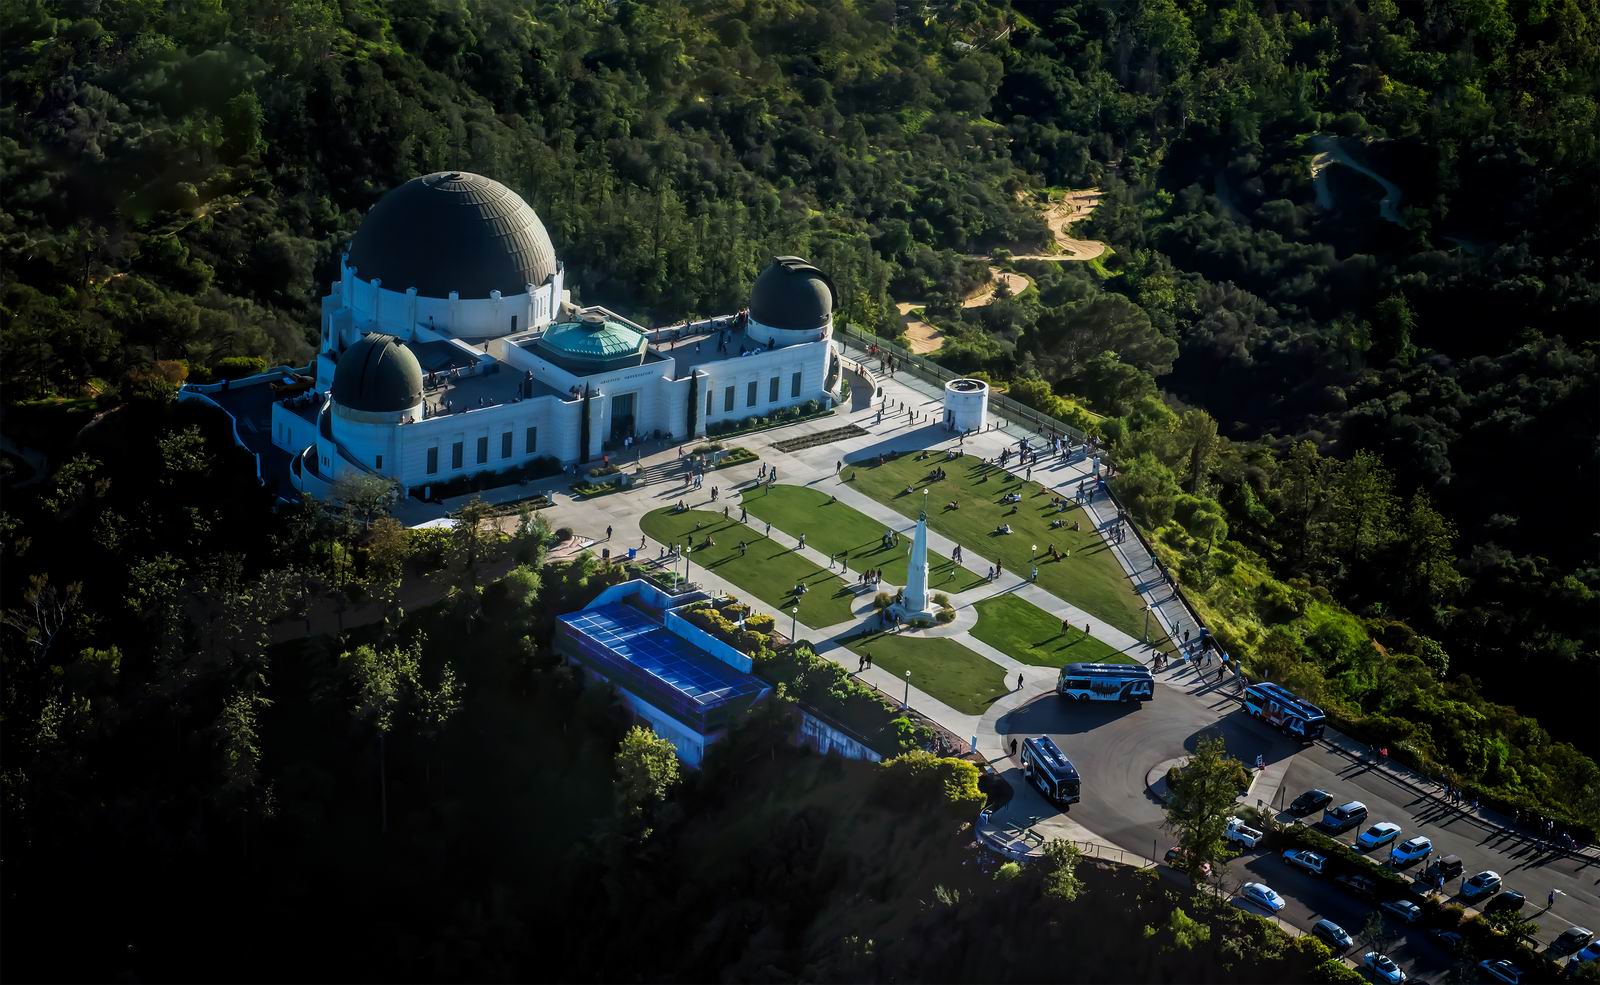 064-Griffith Observatory.jpg